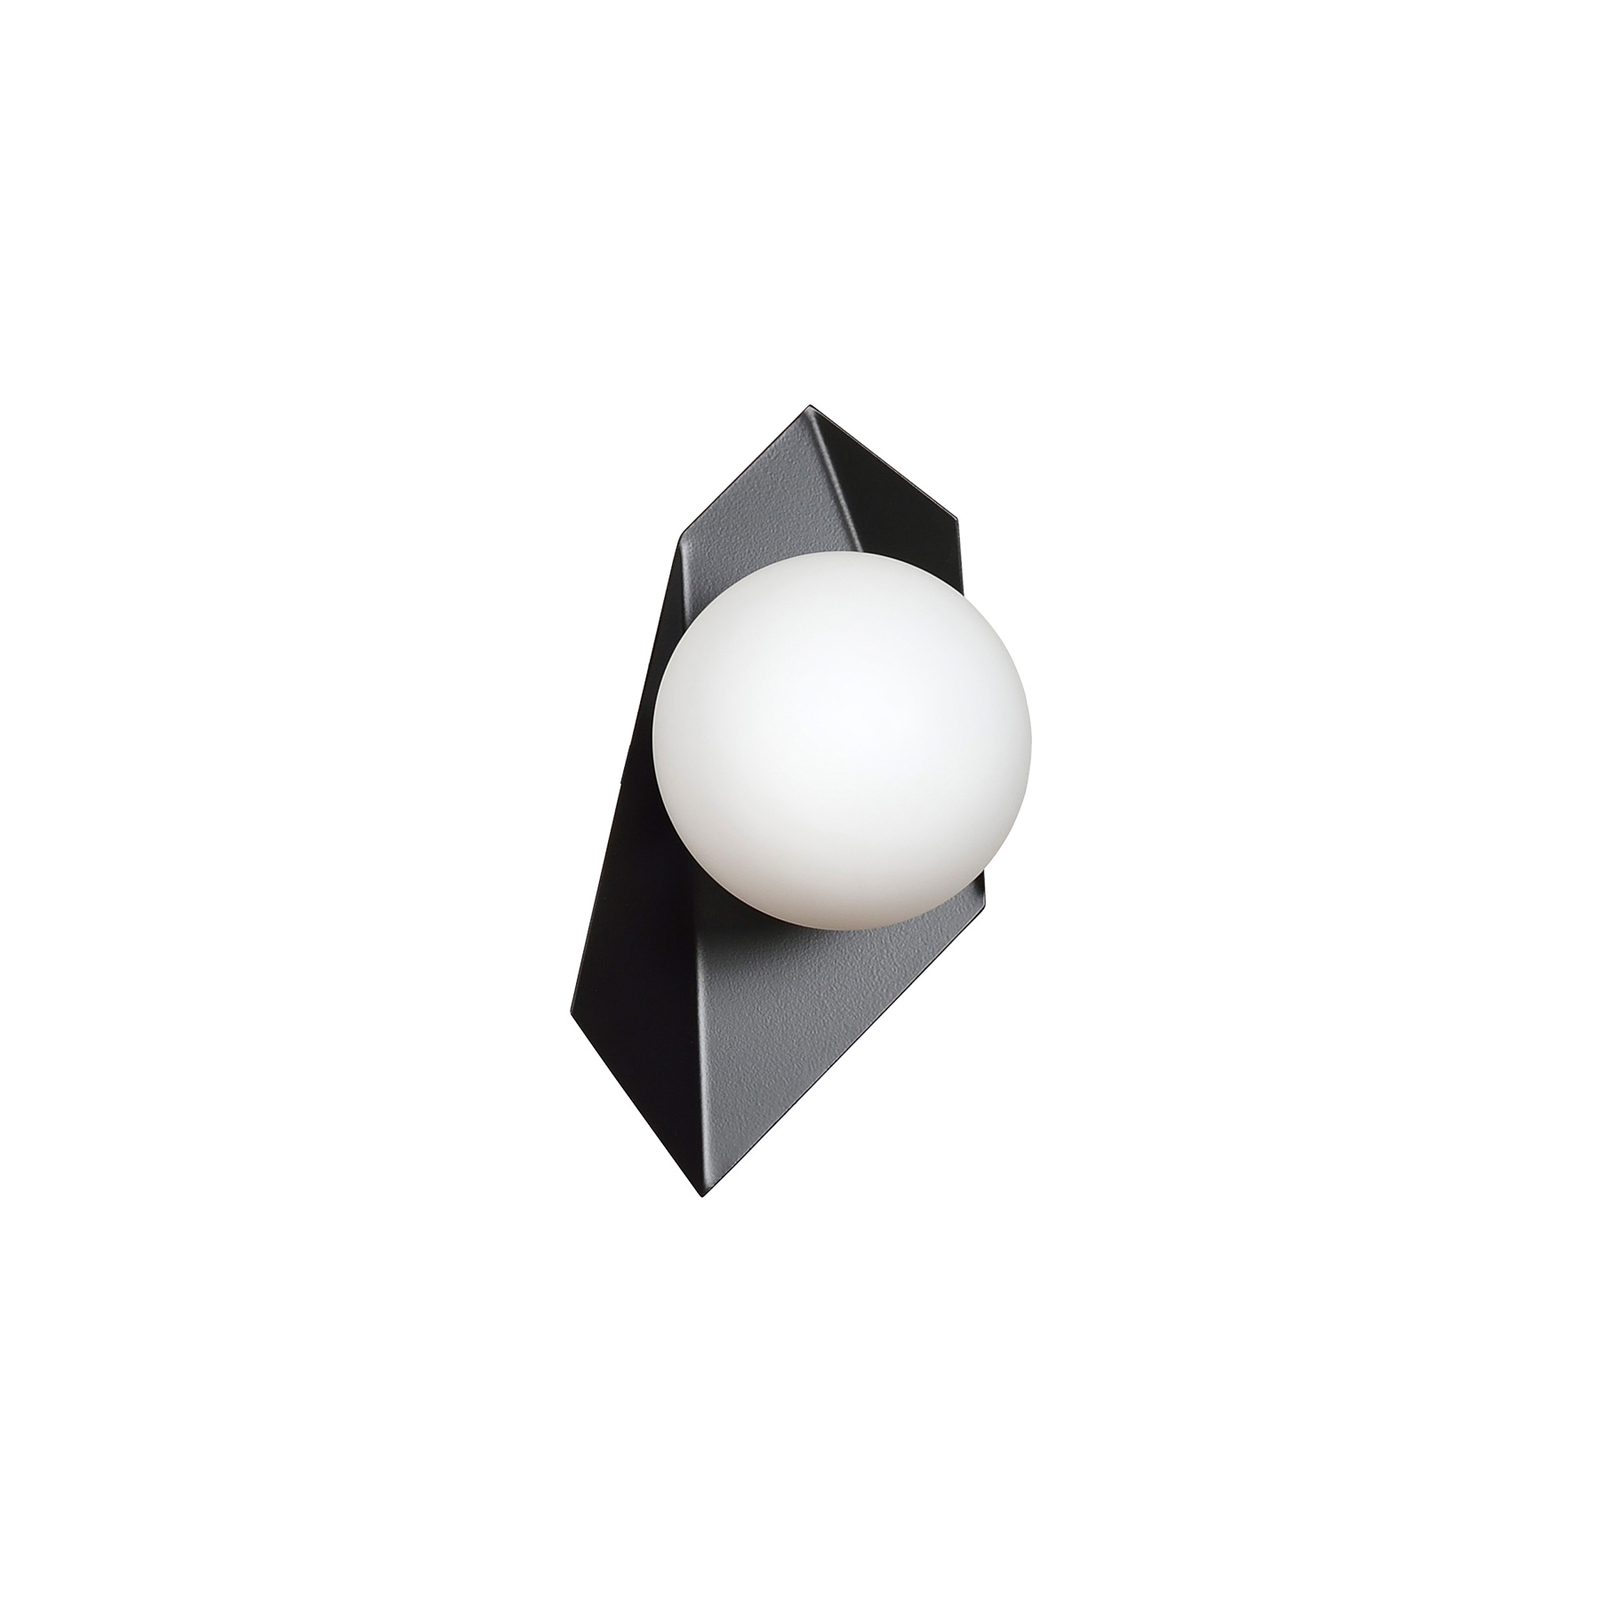 Shield wall light in black and white, one-bulb